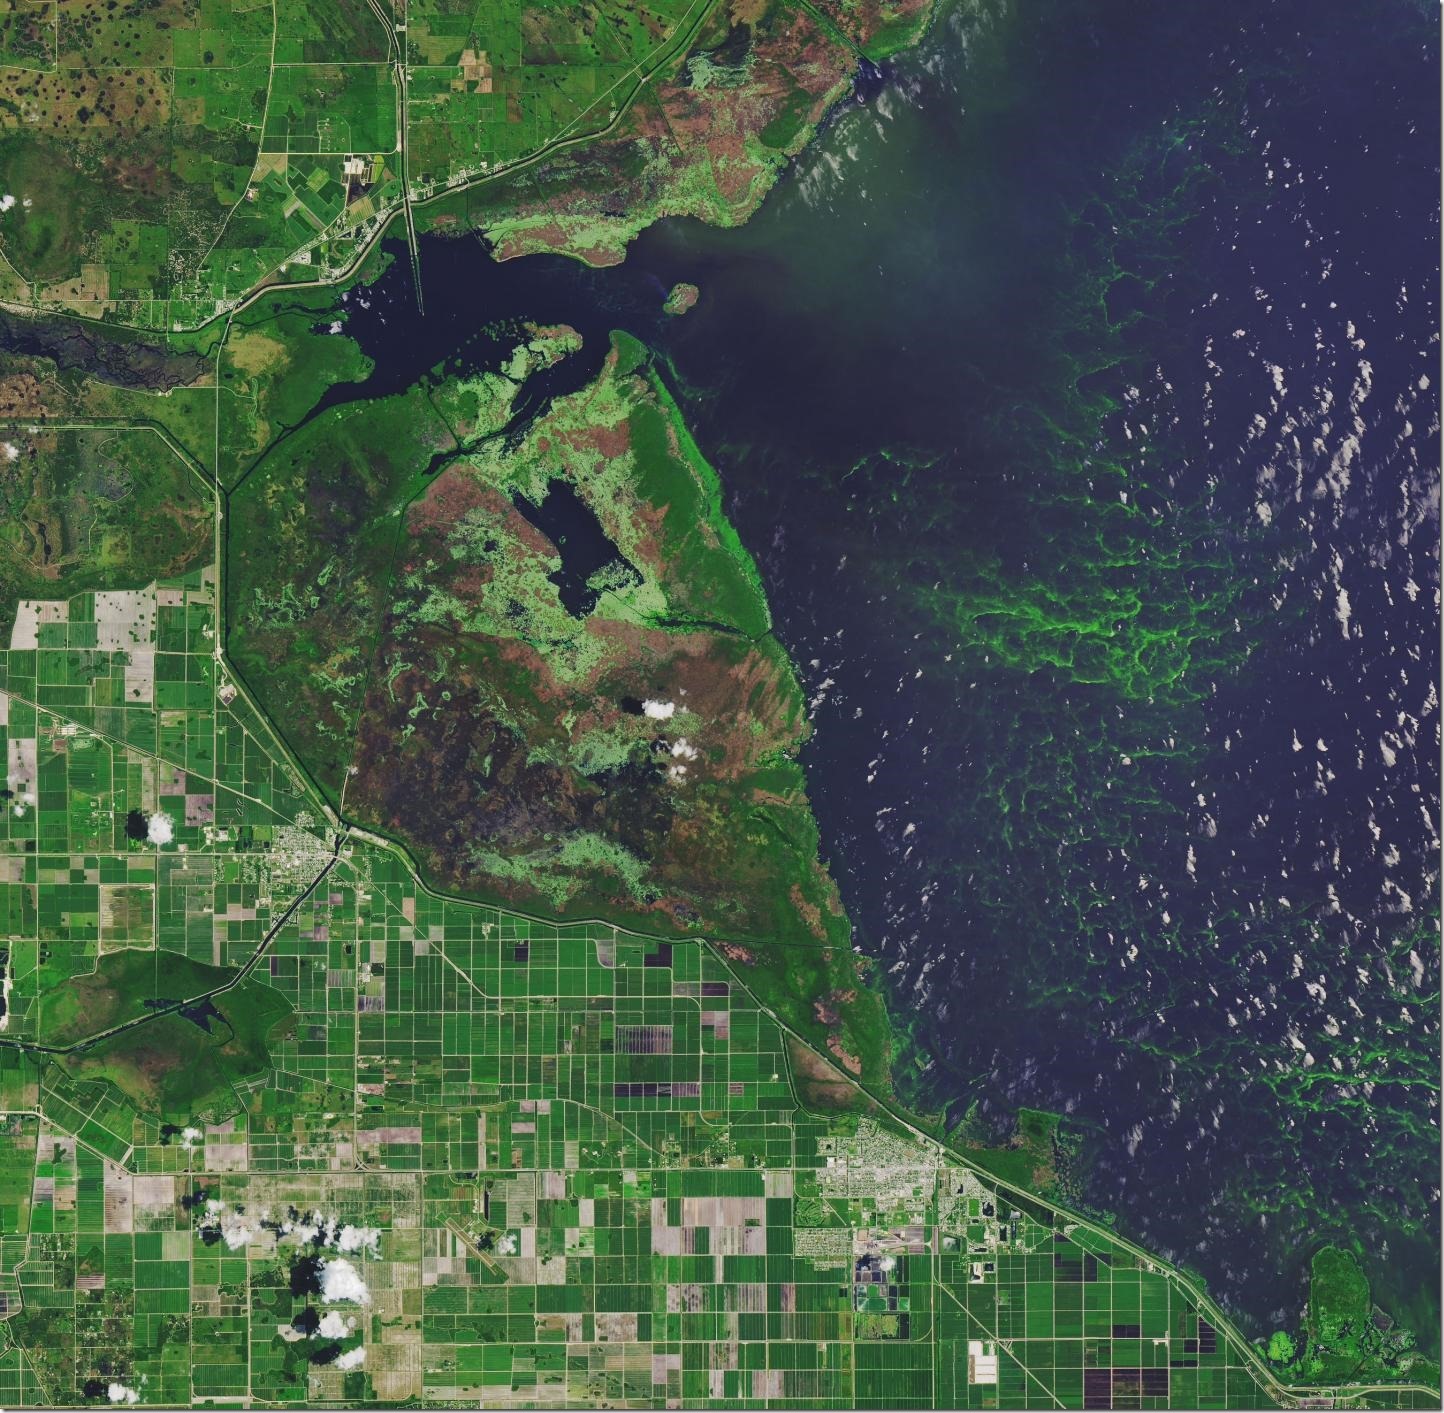 Ho, Michalak, and Pahlevan's study of algal blooms in lakes over a 30-year period found that Florida's Lake Okeechobee deteriorated. Toxic algal blooms resulted in states of emergency being declared in Florida in 2016 and 2018. Credit NASA Earth Observatory image made by Joshua Stevens, using Landsat data from the U.S. Geological Survey.